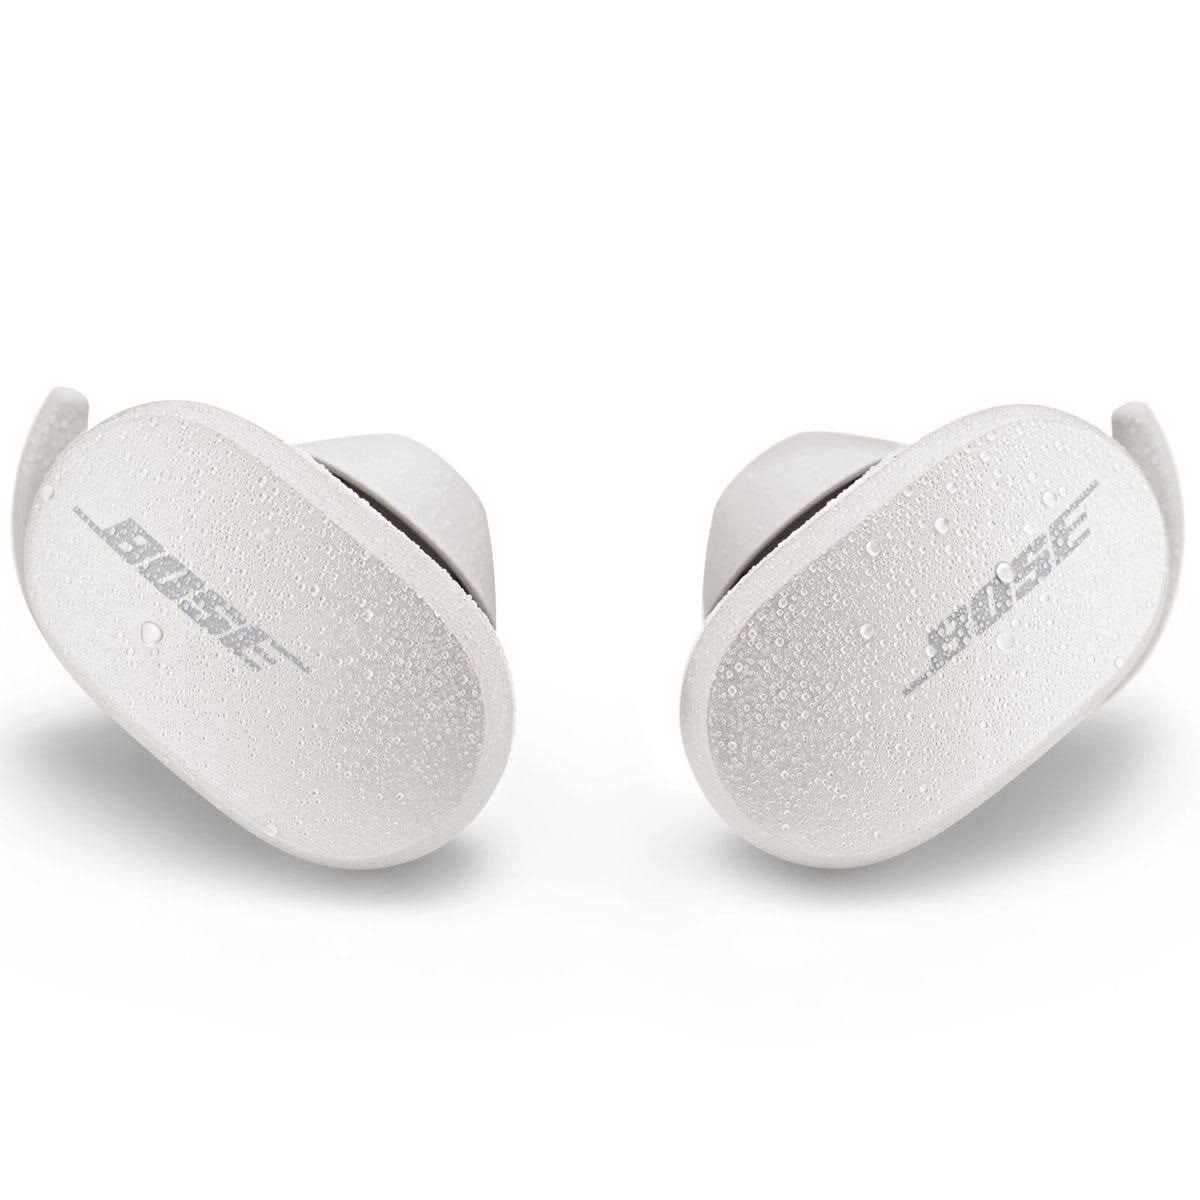 Bose QuietComfort True wireless earphones with mic in-ear Bluetooth active noise canceling noise isolating soapstone